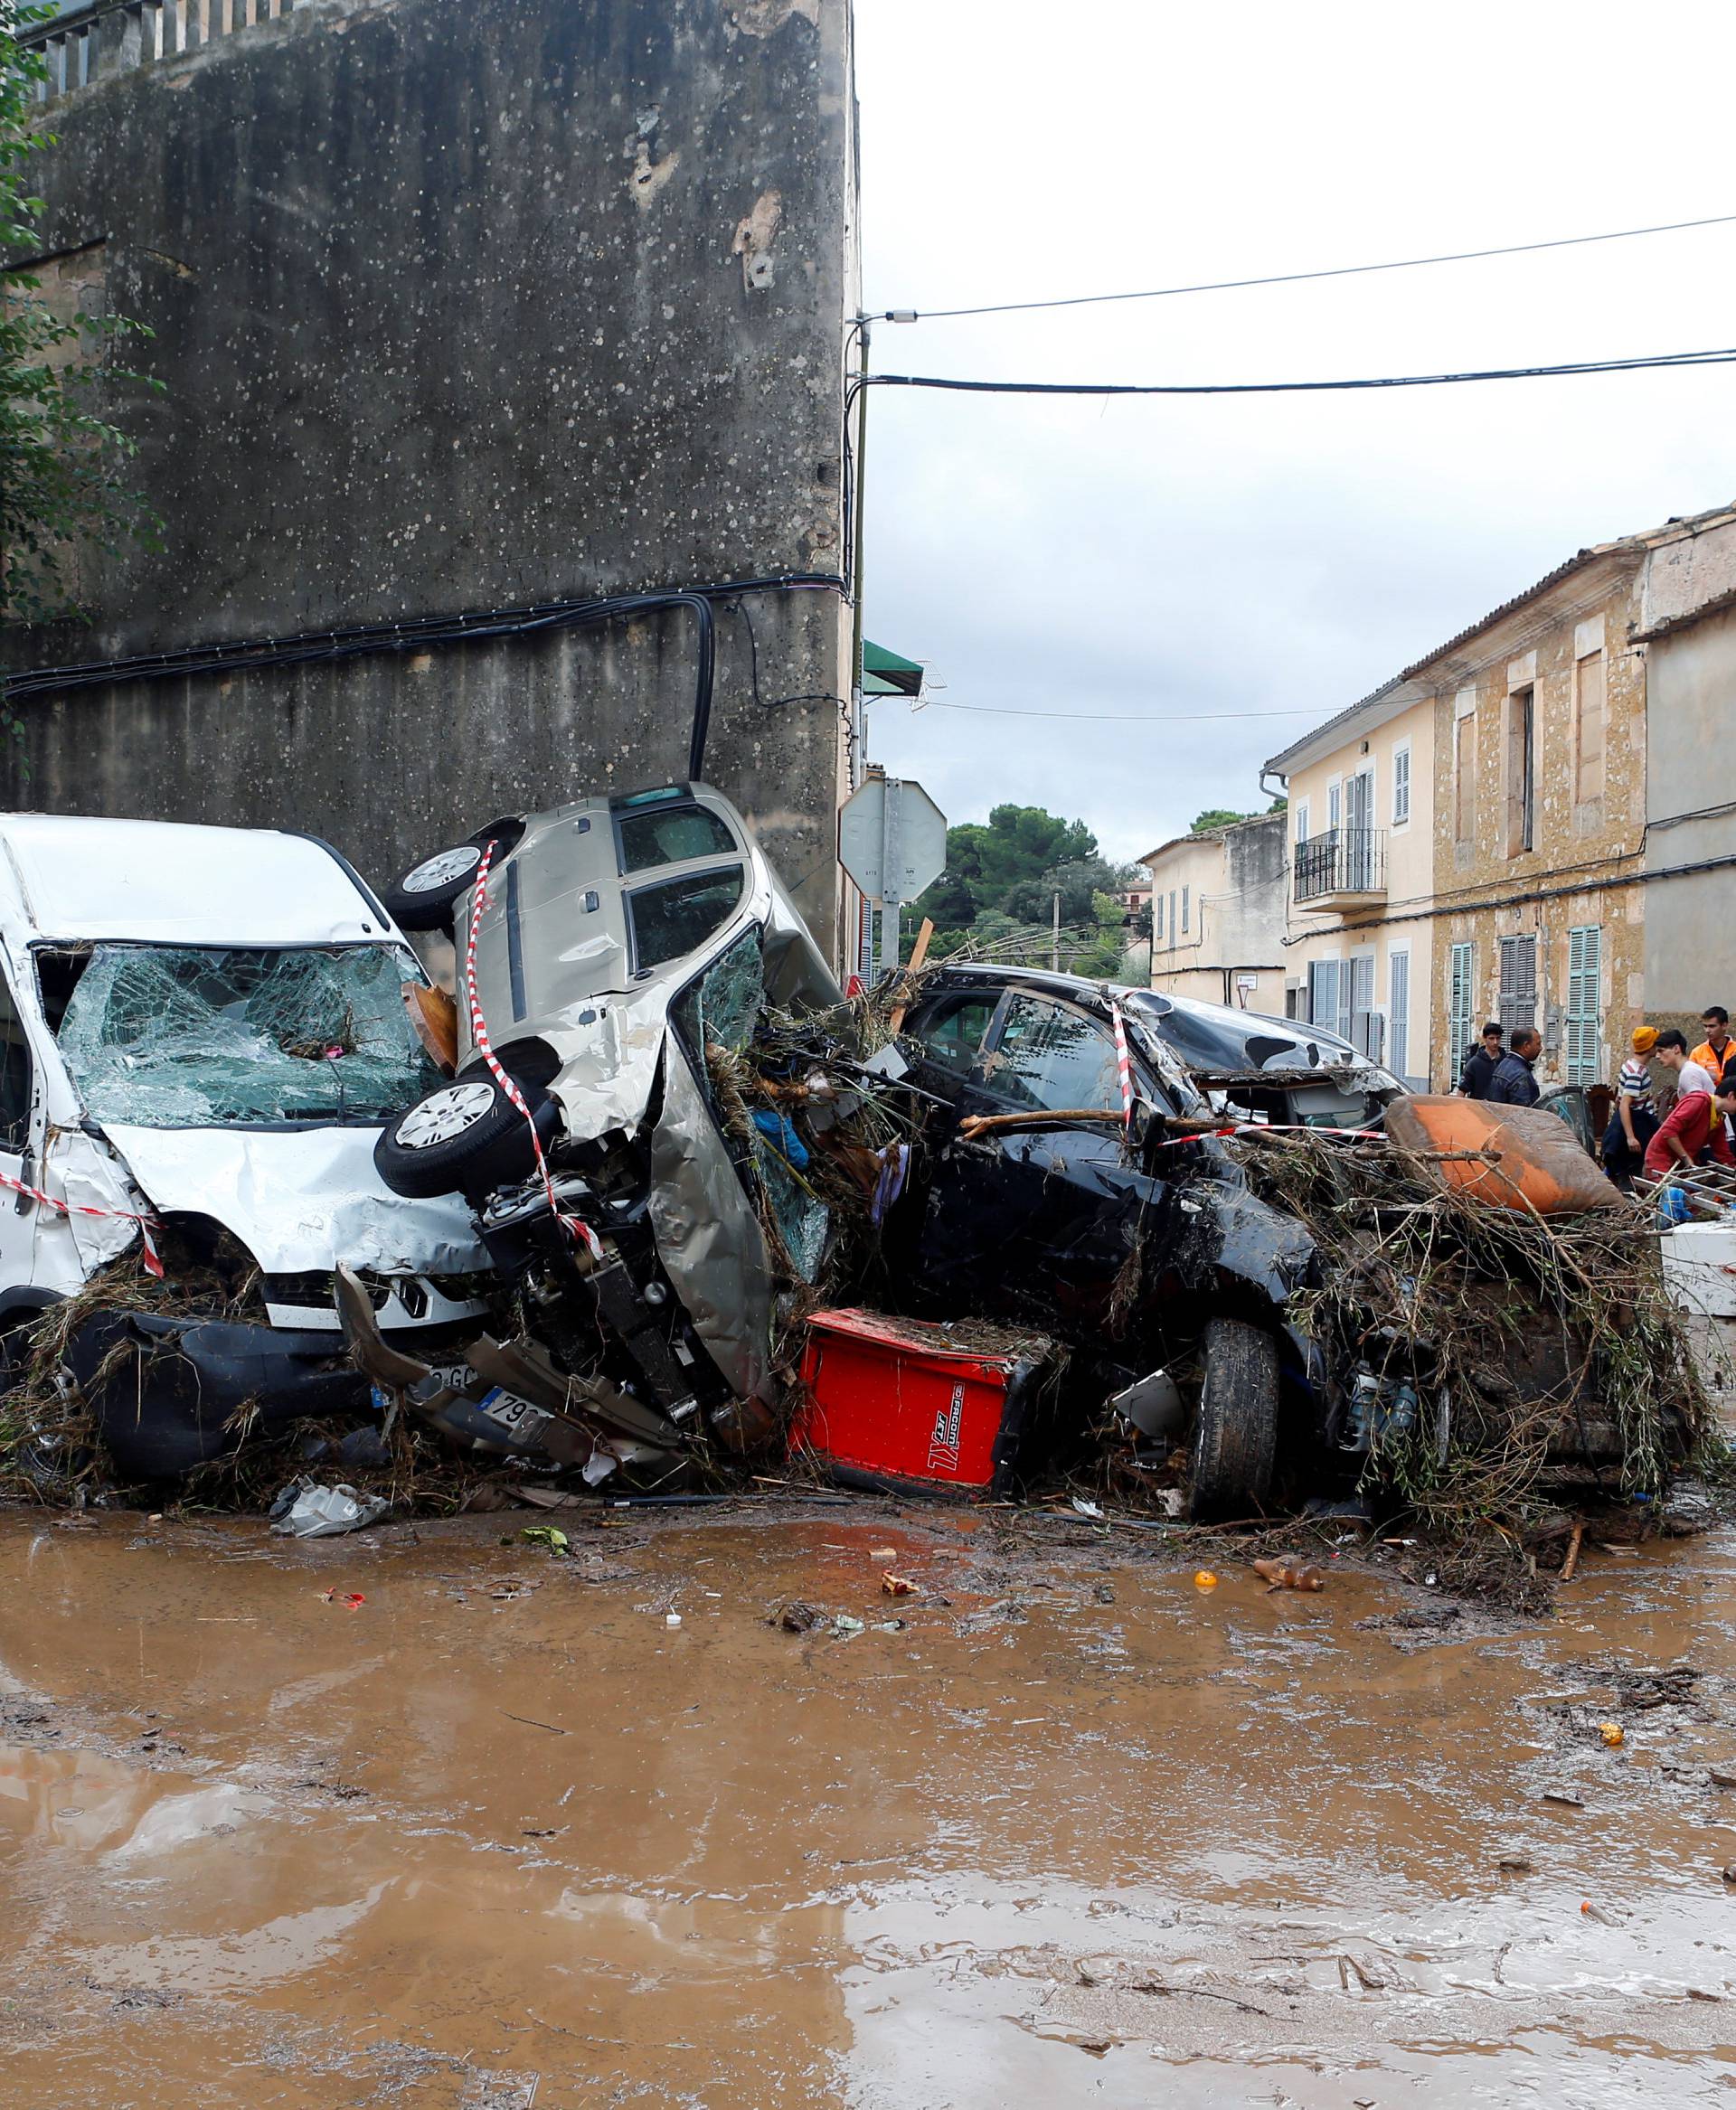 Destroyed cars are seen on the streets as heavy rain and flash floods hit Sant Llorenc de Cardassar on the island of Mallorca